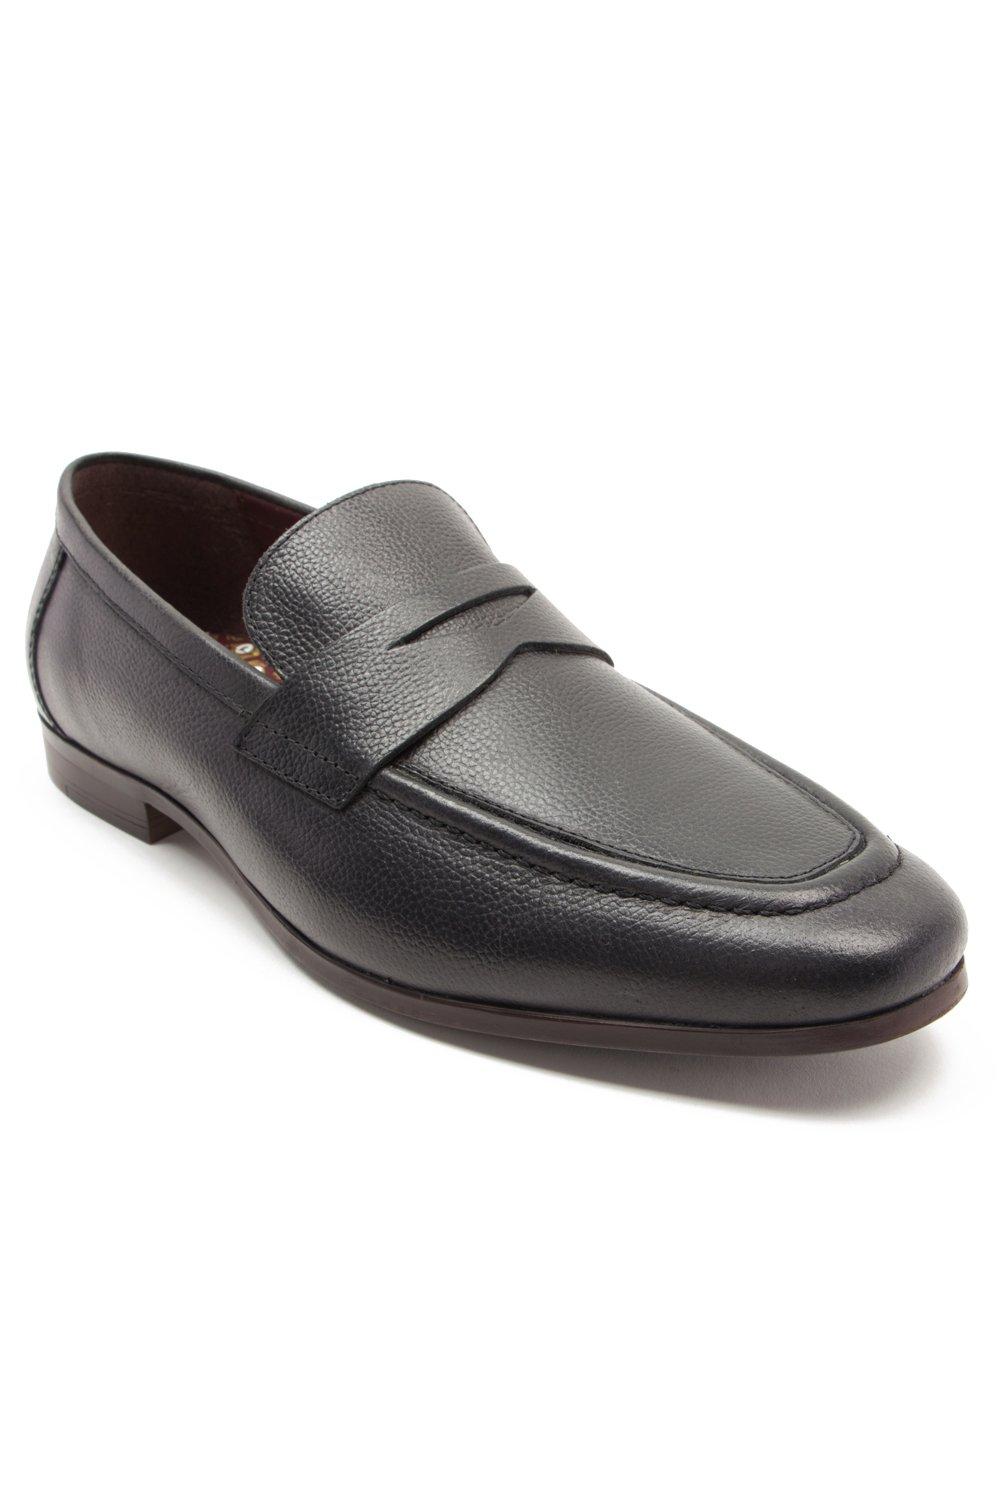 Shoes | 'Harley' Loafer Leather Slip-On Loafer Shoes | Thomas Crick